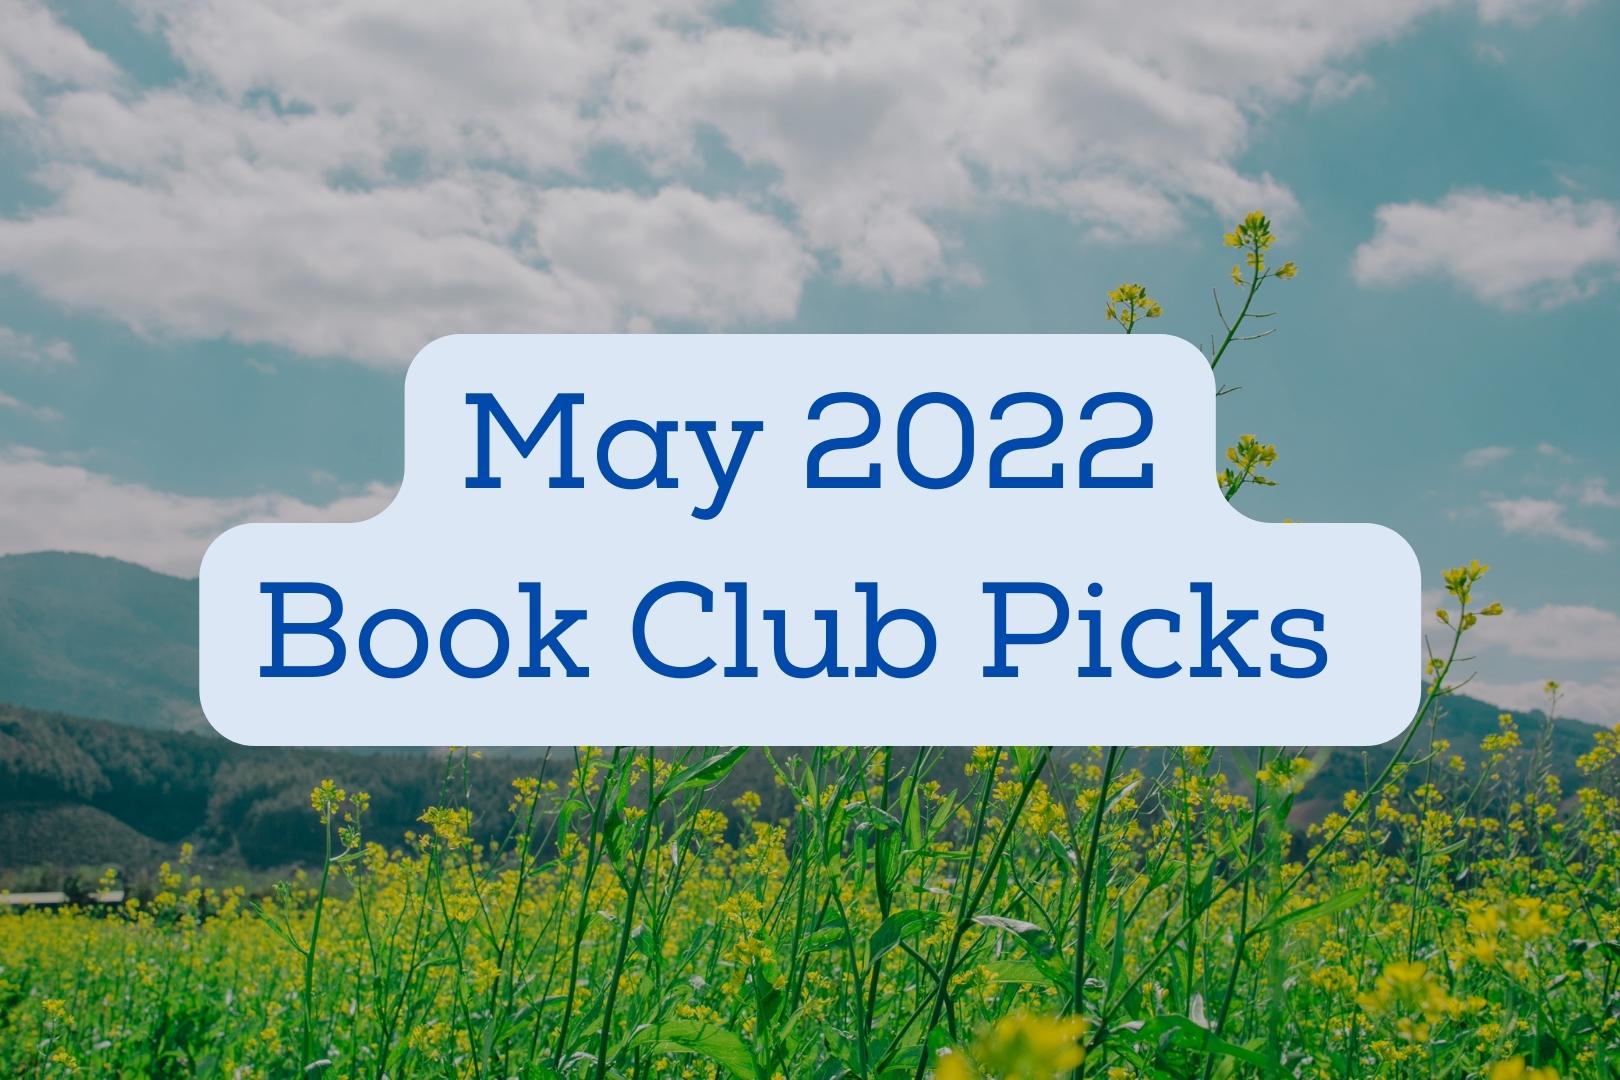 Book Club Picks for May 2022